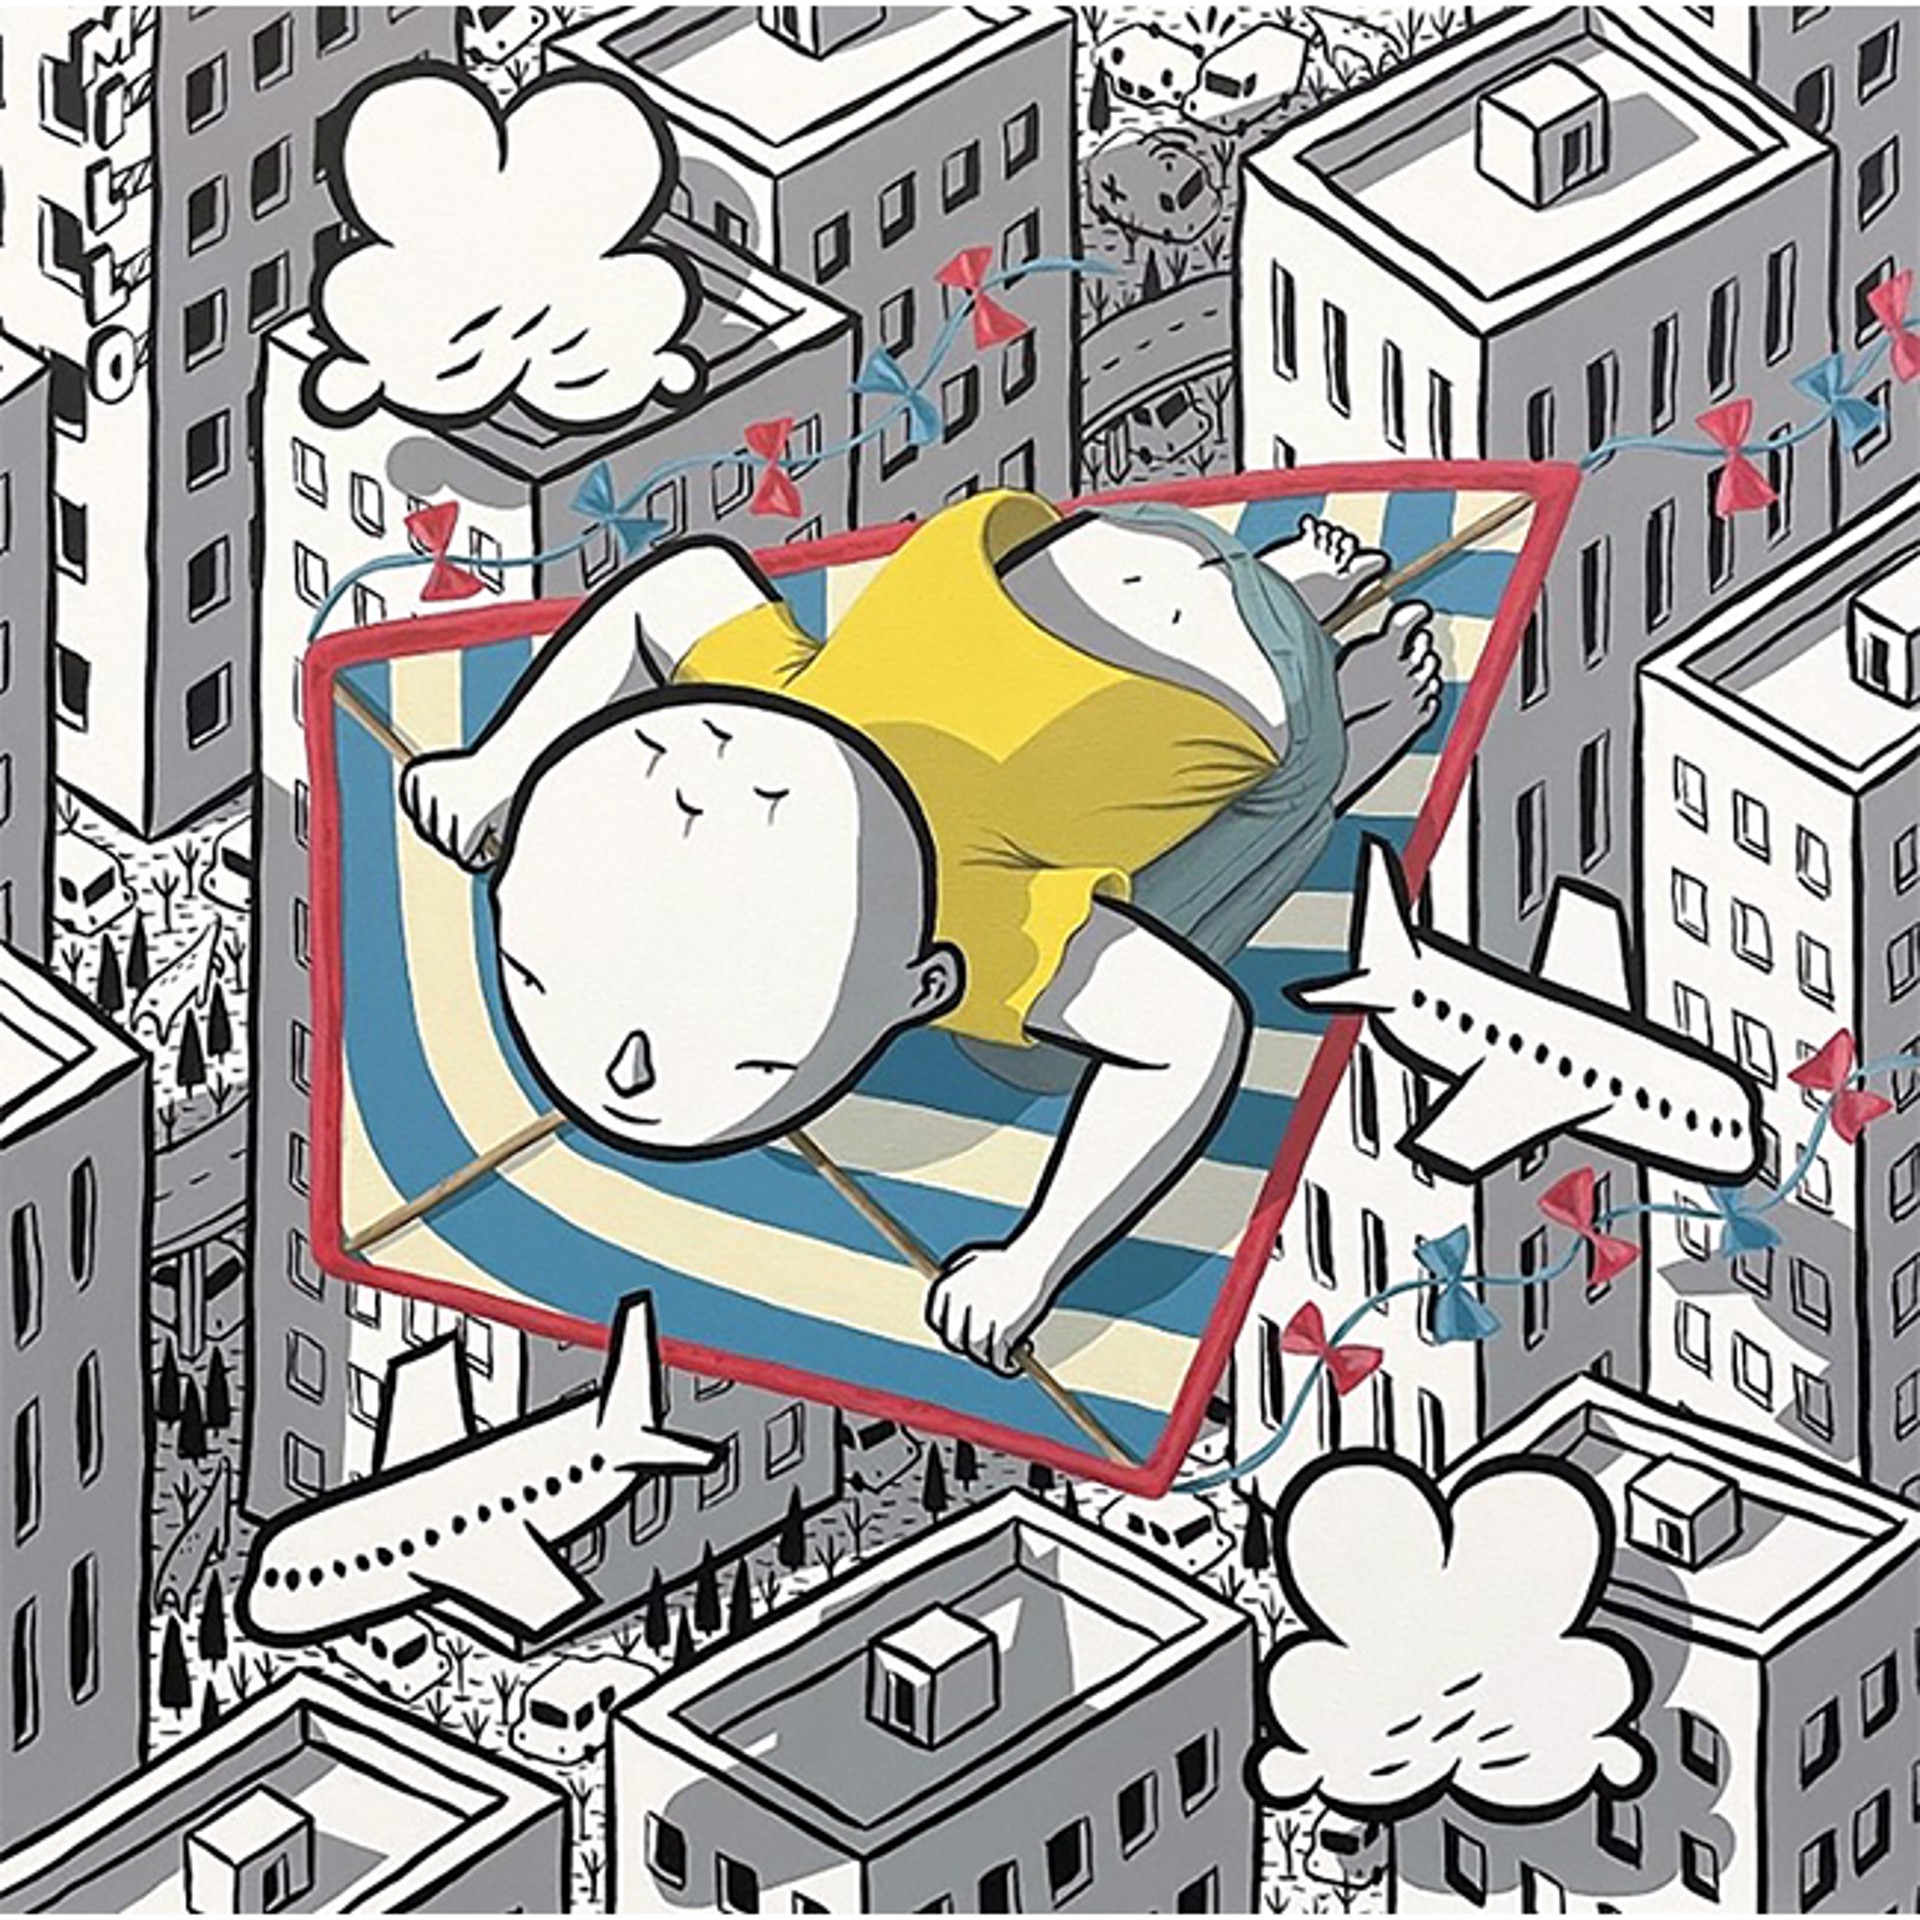 Exercise Your Imagination by Millo